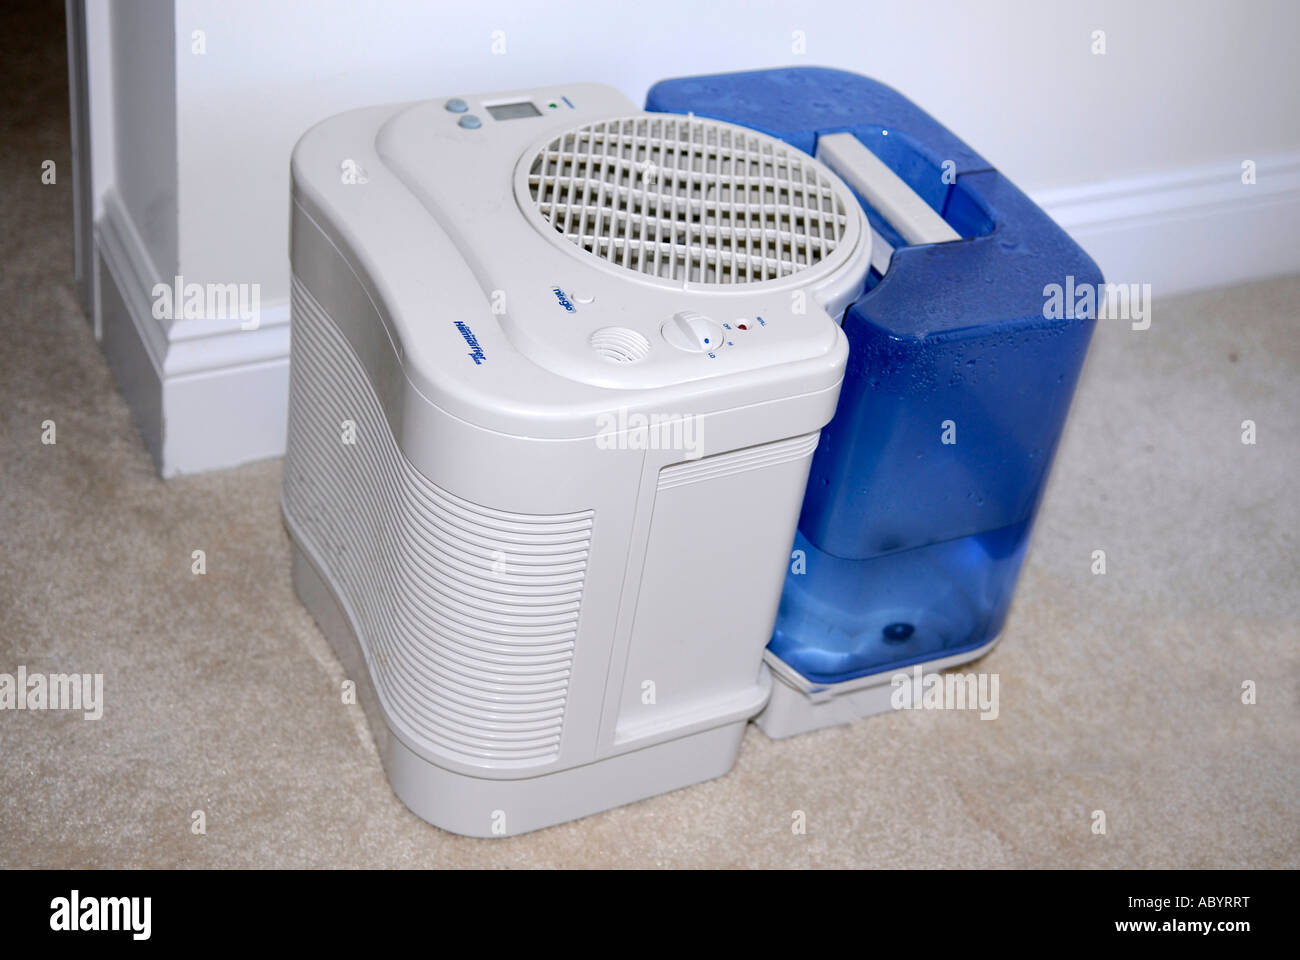 Room size humidifier